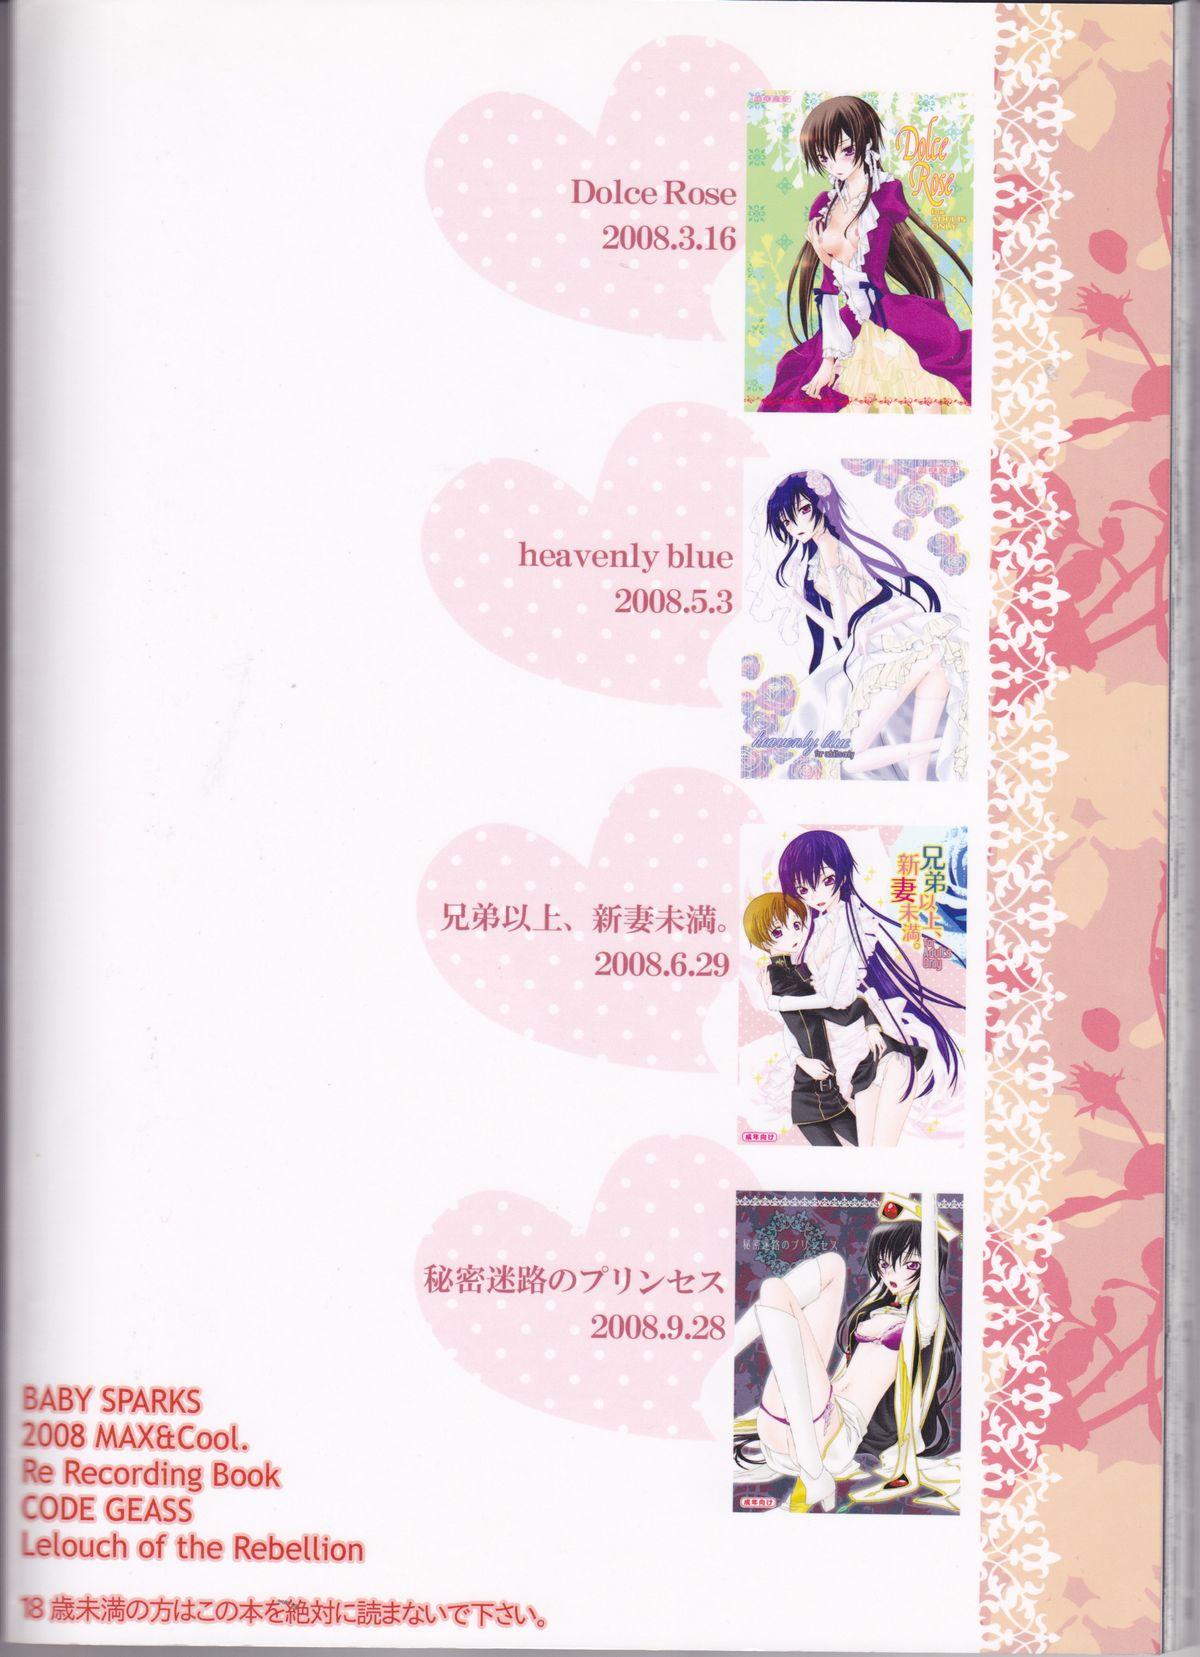 French Porn Baby Sparks 2008 Sairokushuu - Code geass Russia - Page 74